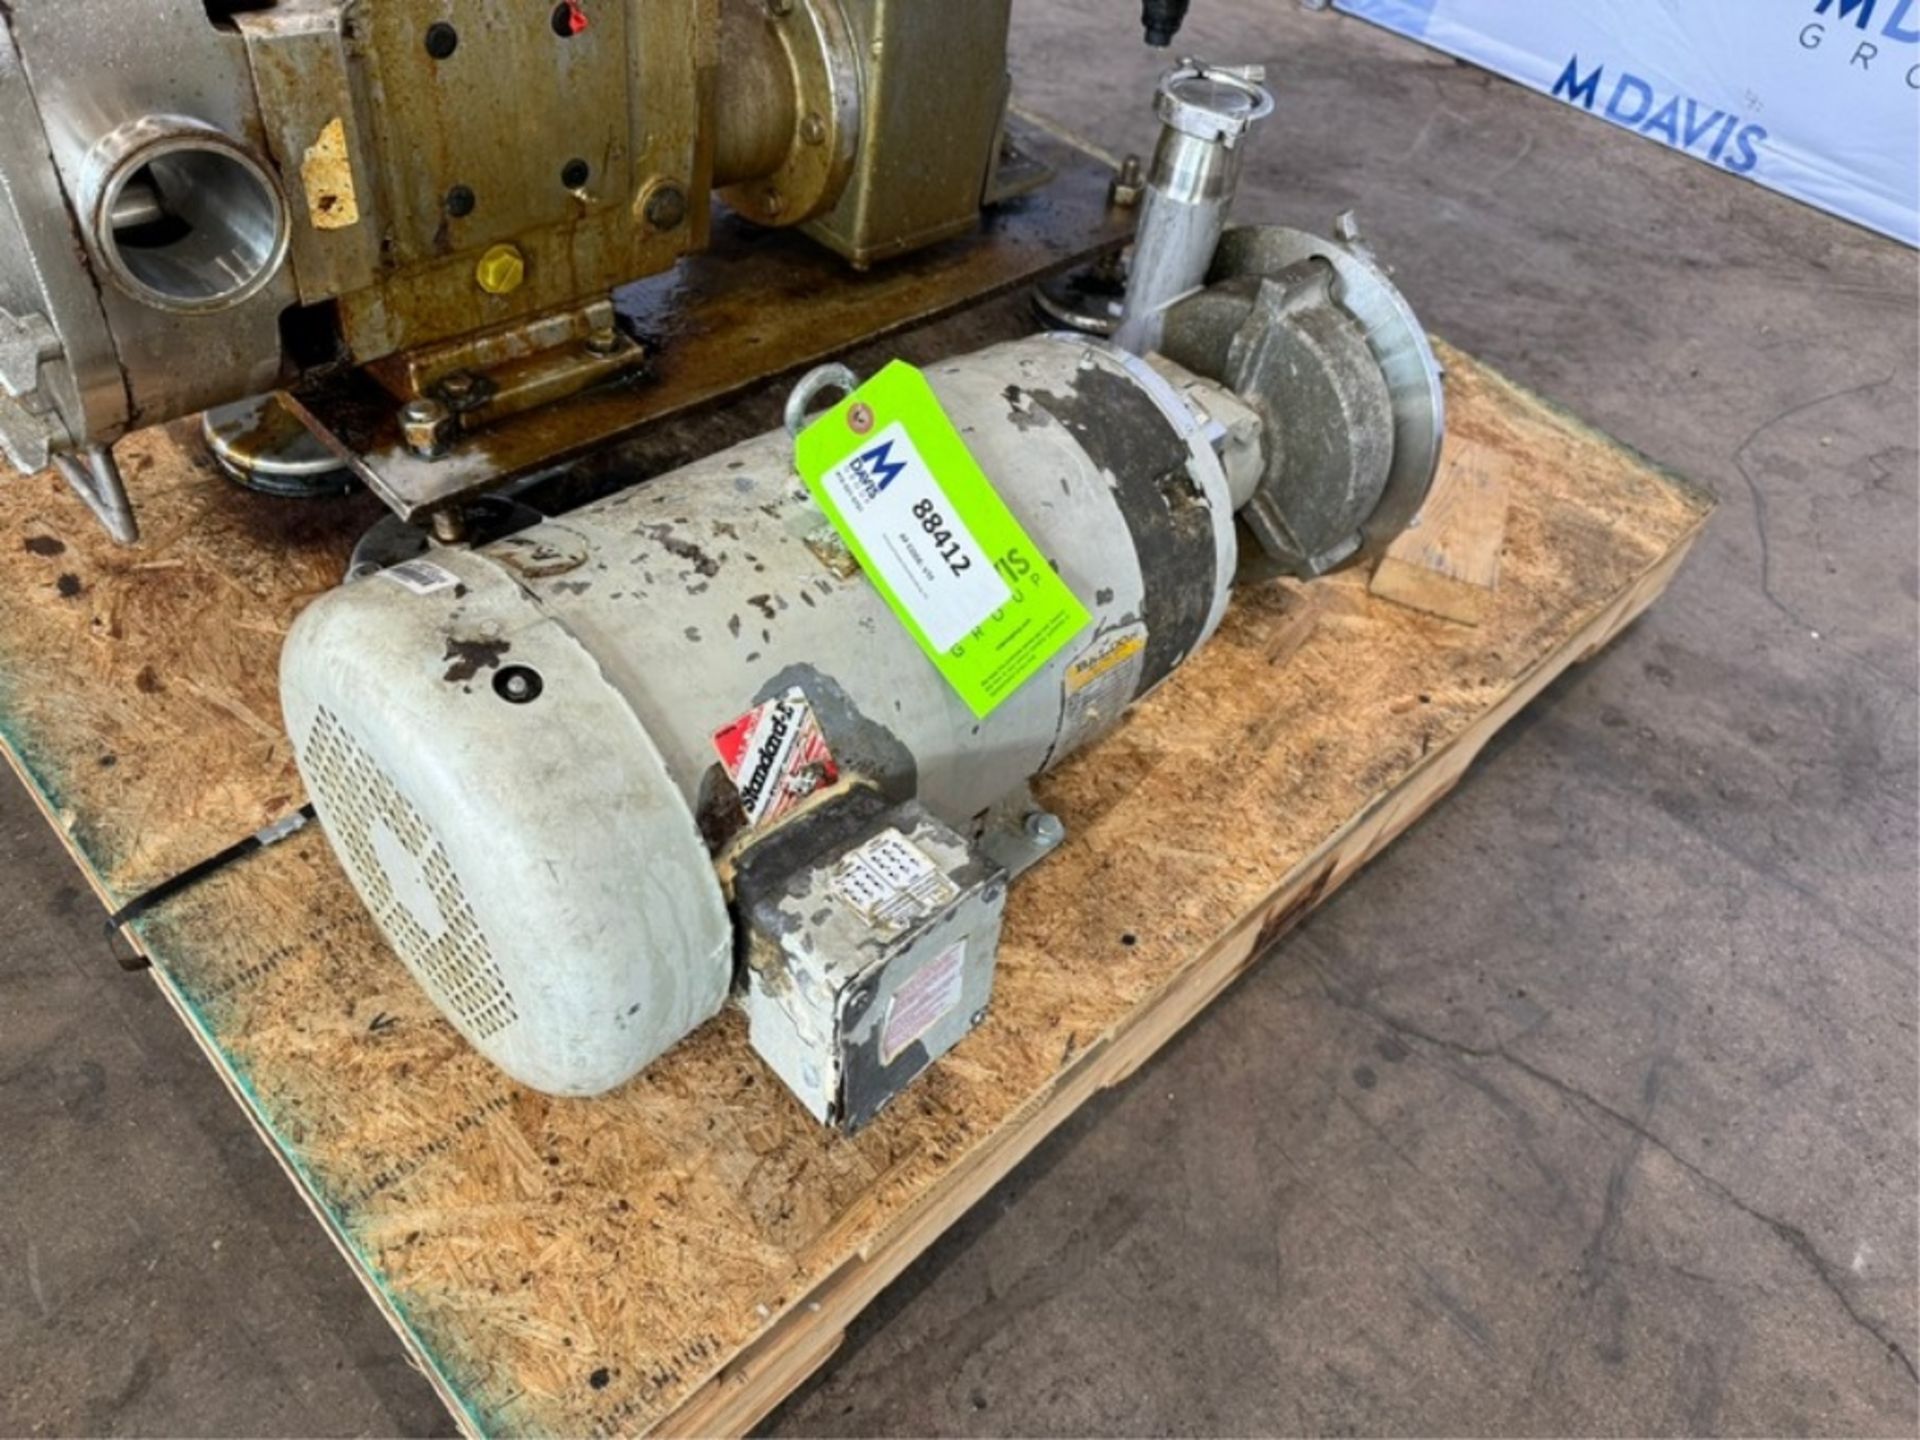 Fristam 15 hp Centrifugal Pump, M/N FPX3532-140, S/N FPX35320200975, with Aprox. 2-1/2" x 3" Clamp - Image 2 of 5